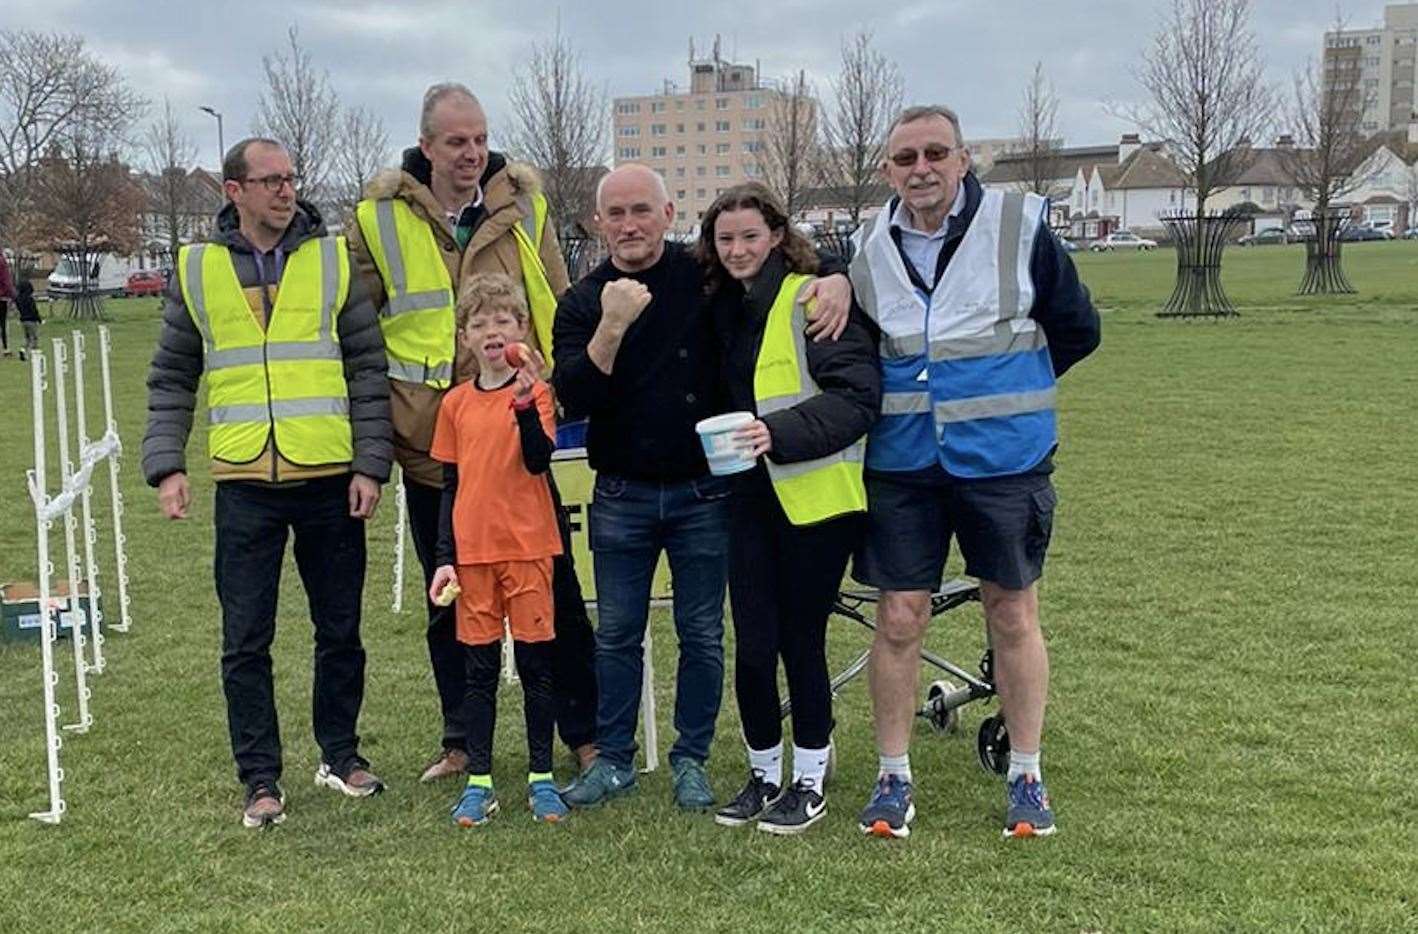 Former boxing legend Barry McGuigan was spotted at a kids parkrun event over the weekend. Picture: Tjarda Thomas